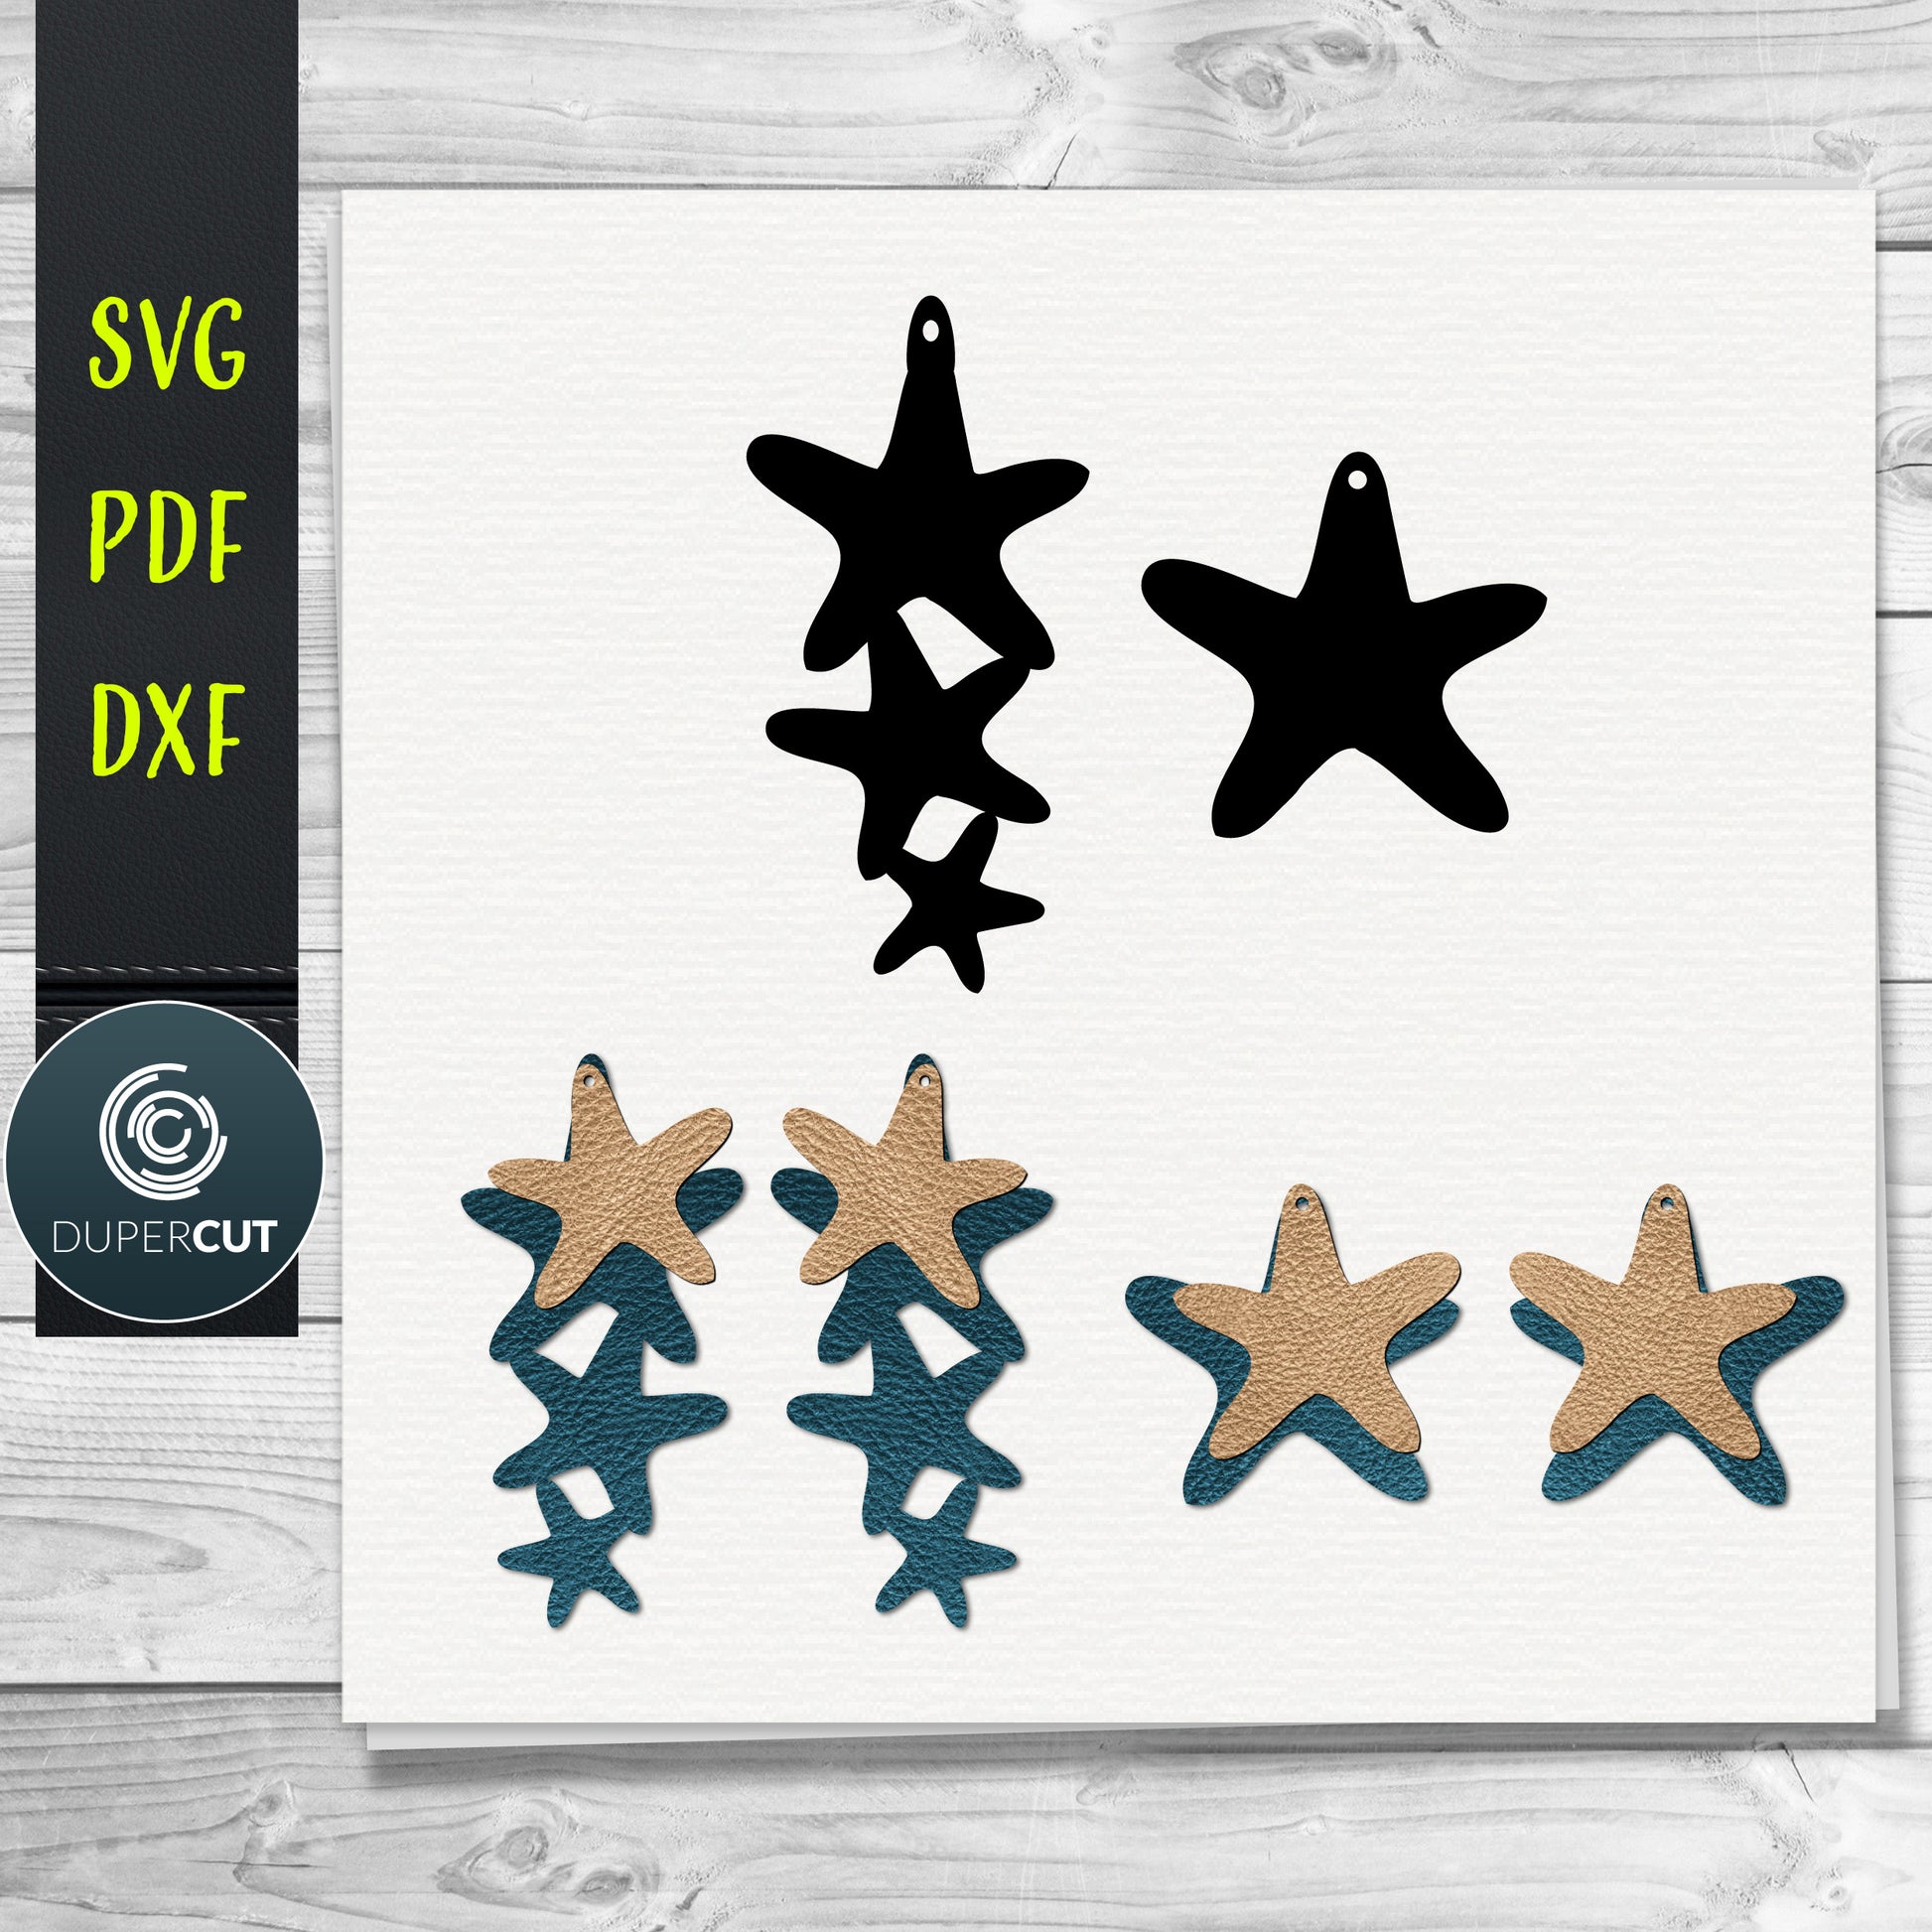 DIY Starfish sea shells Layered Leather Earrings SVG PDF DXF vector files. Jewellery making template for laser and cutting machines - Glowforge, Cricut, Silhouette Cameo.